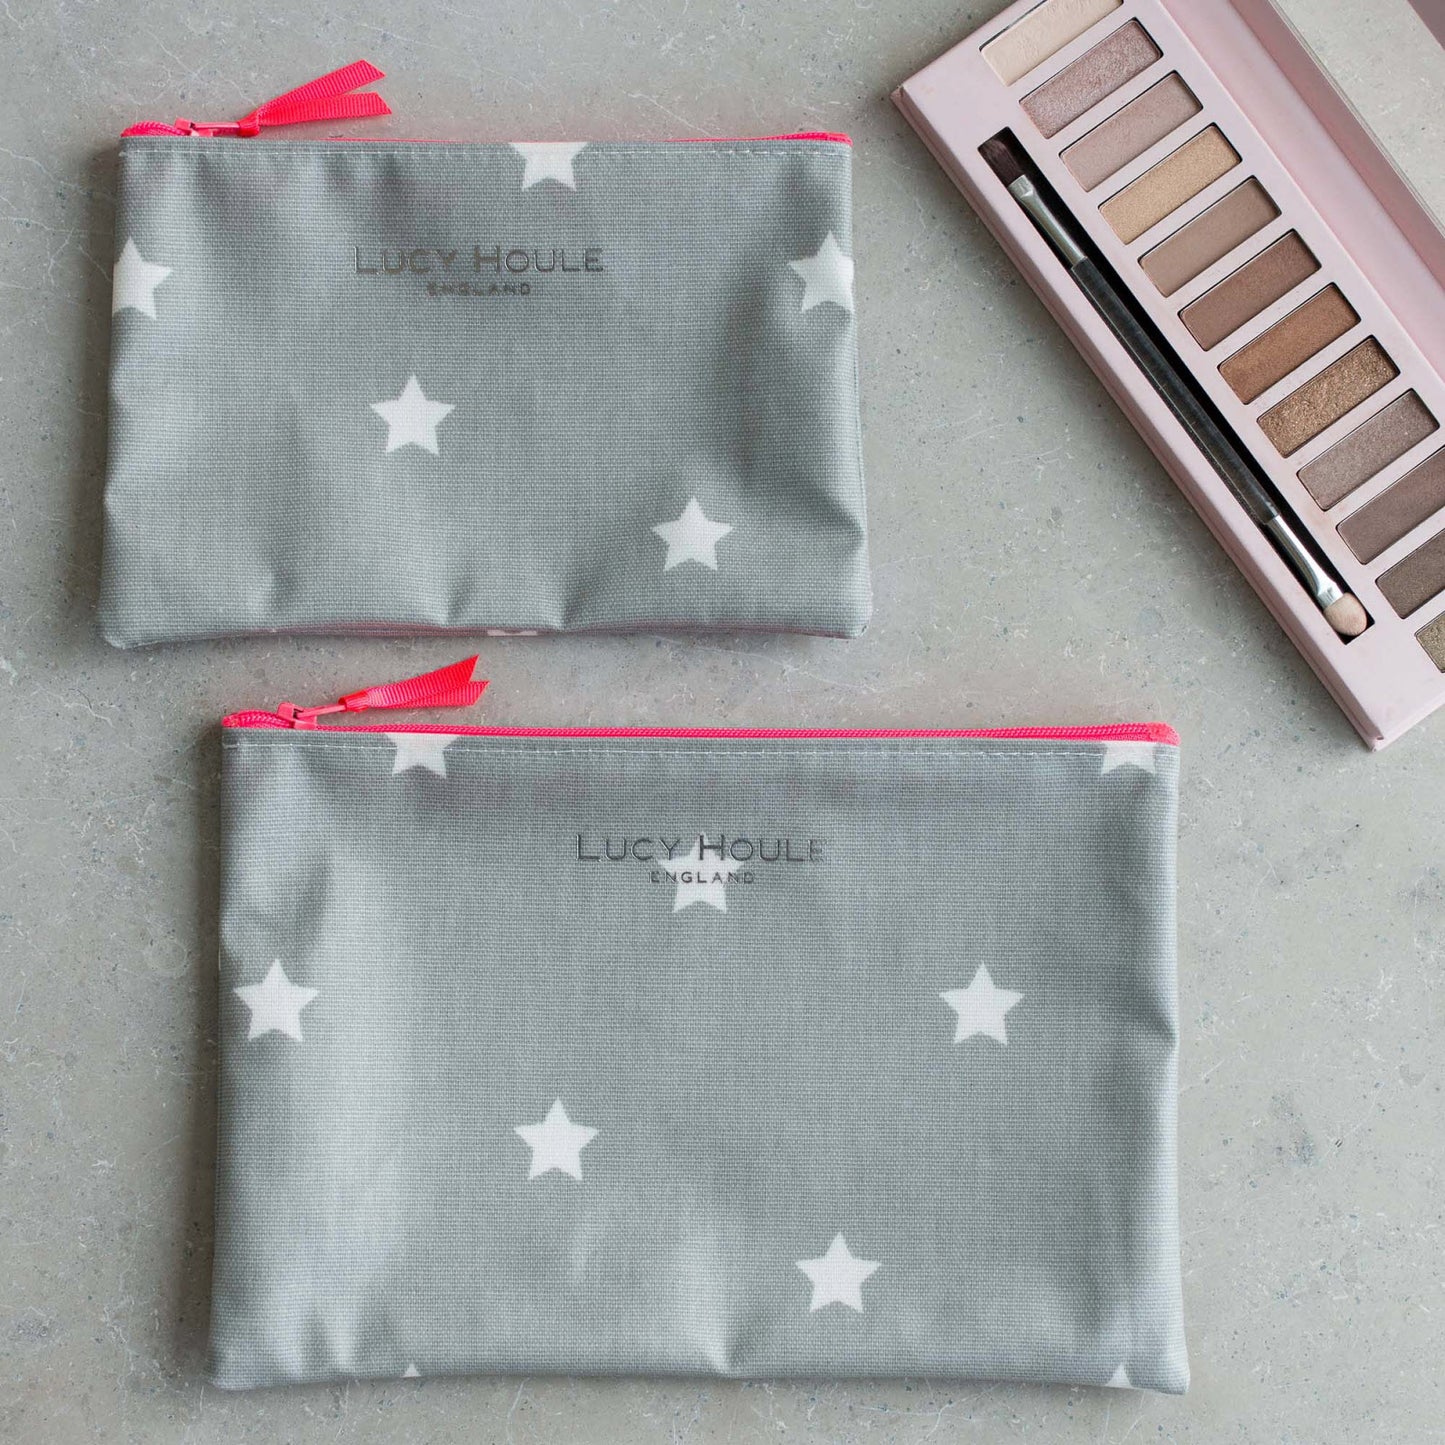 Grey & White Star Make-Up Bag with Pink Neon Zip 'Limited Edition'